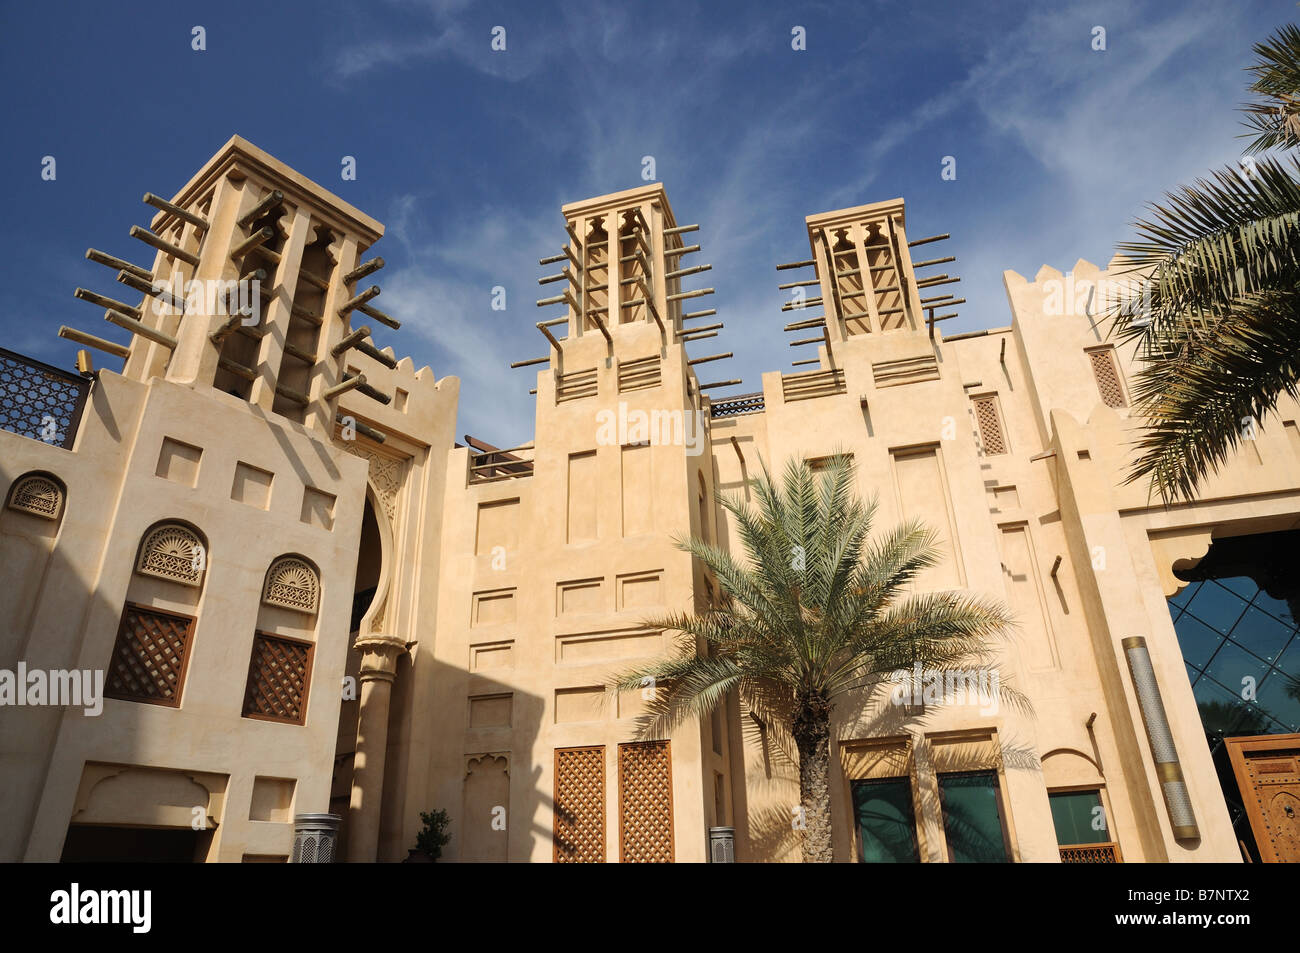 Buildings with Traditional Arabic Wind Towers in Dubai, United Arab Emirates Stock Photo